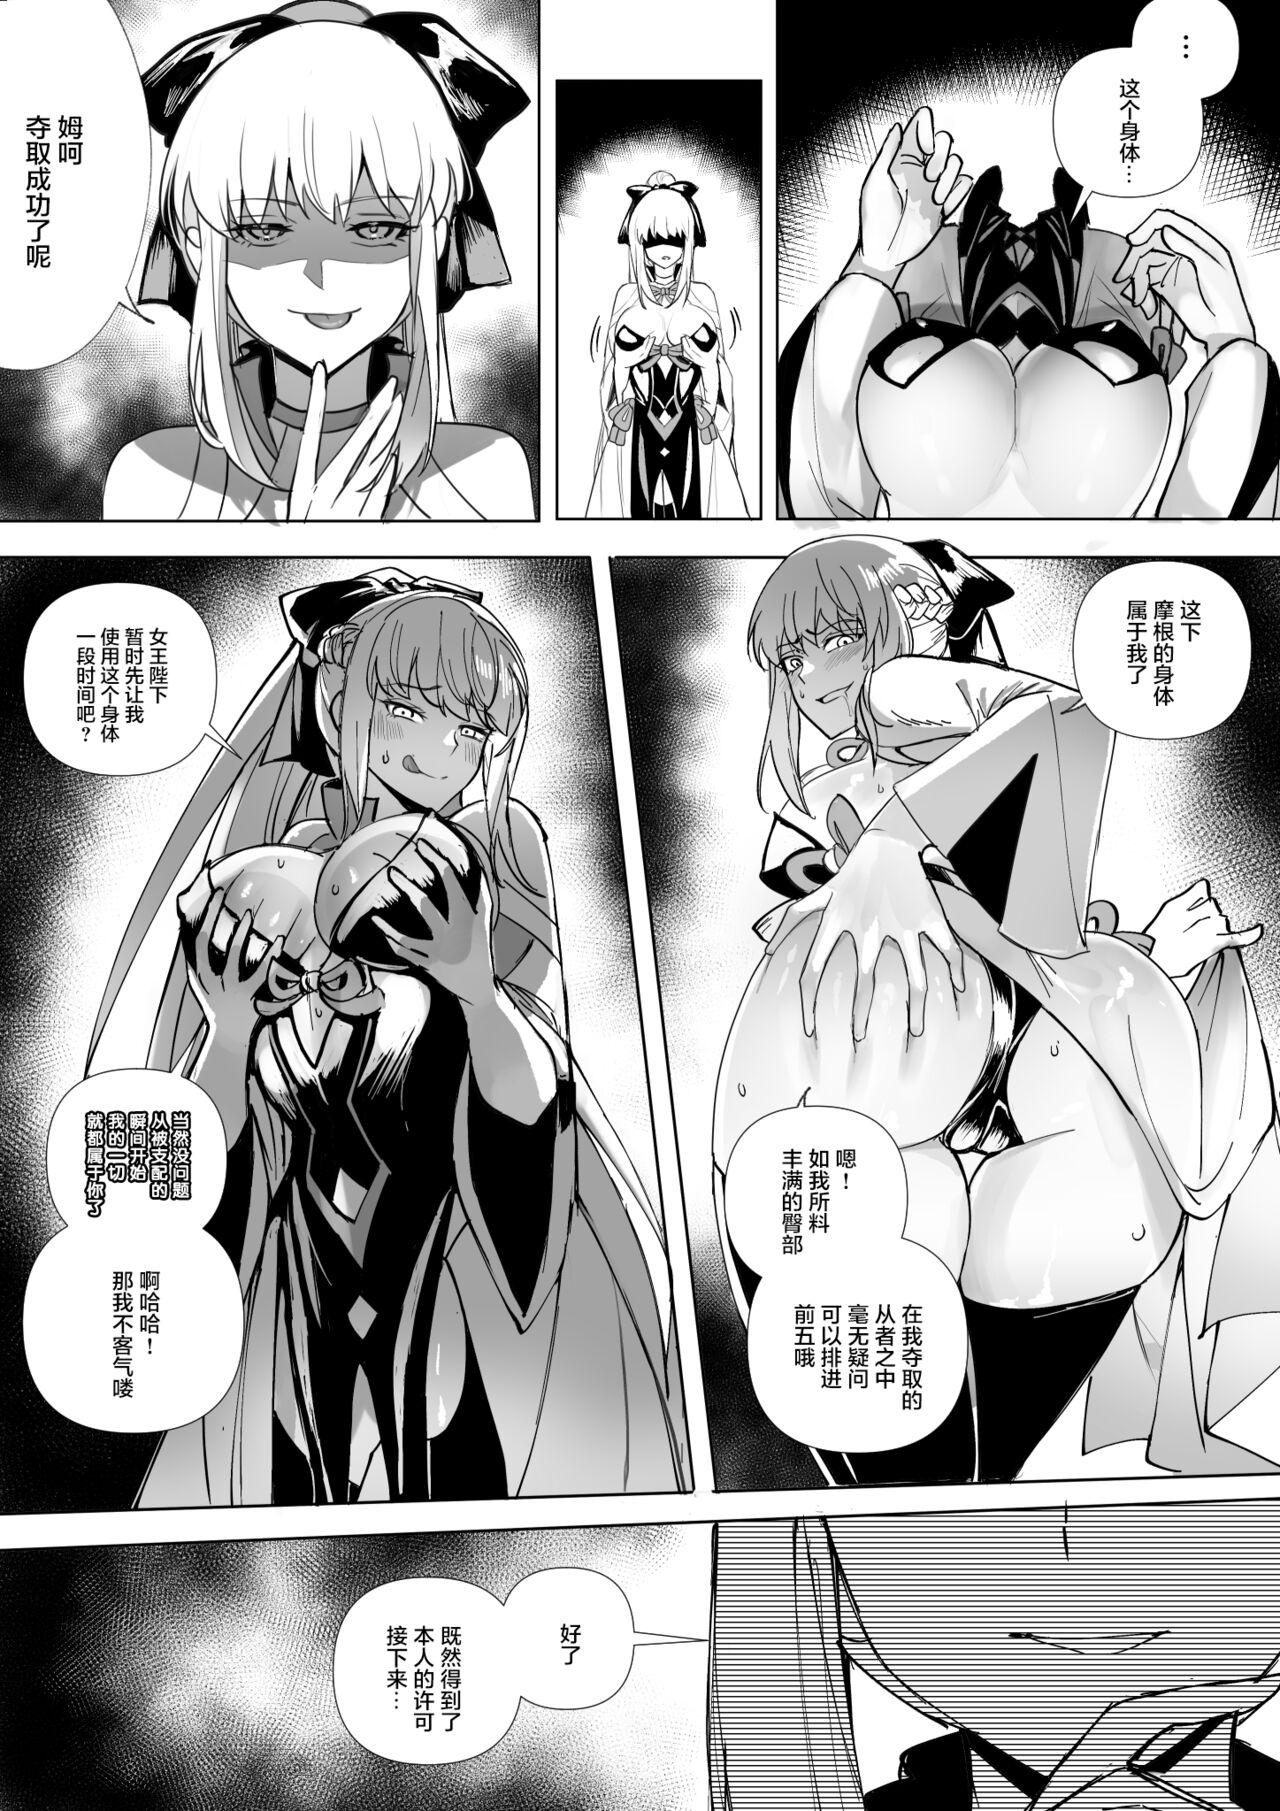 Family Roleplay FGO モルガン&水着カーマ憑依 - Fate grand order Leaked - Page 4